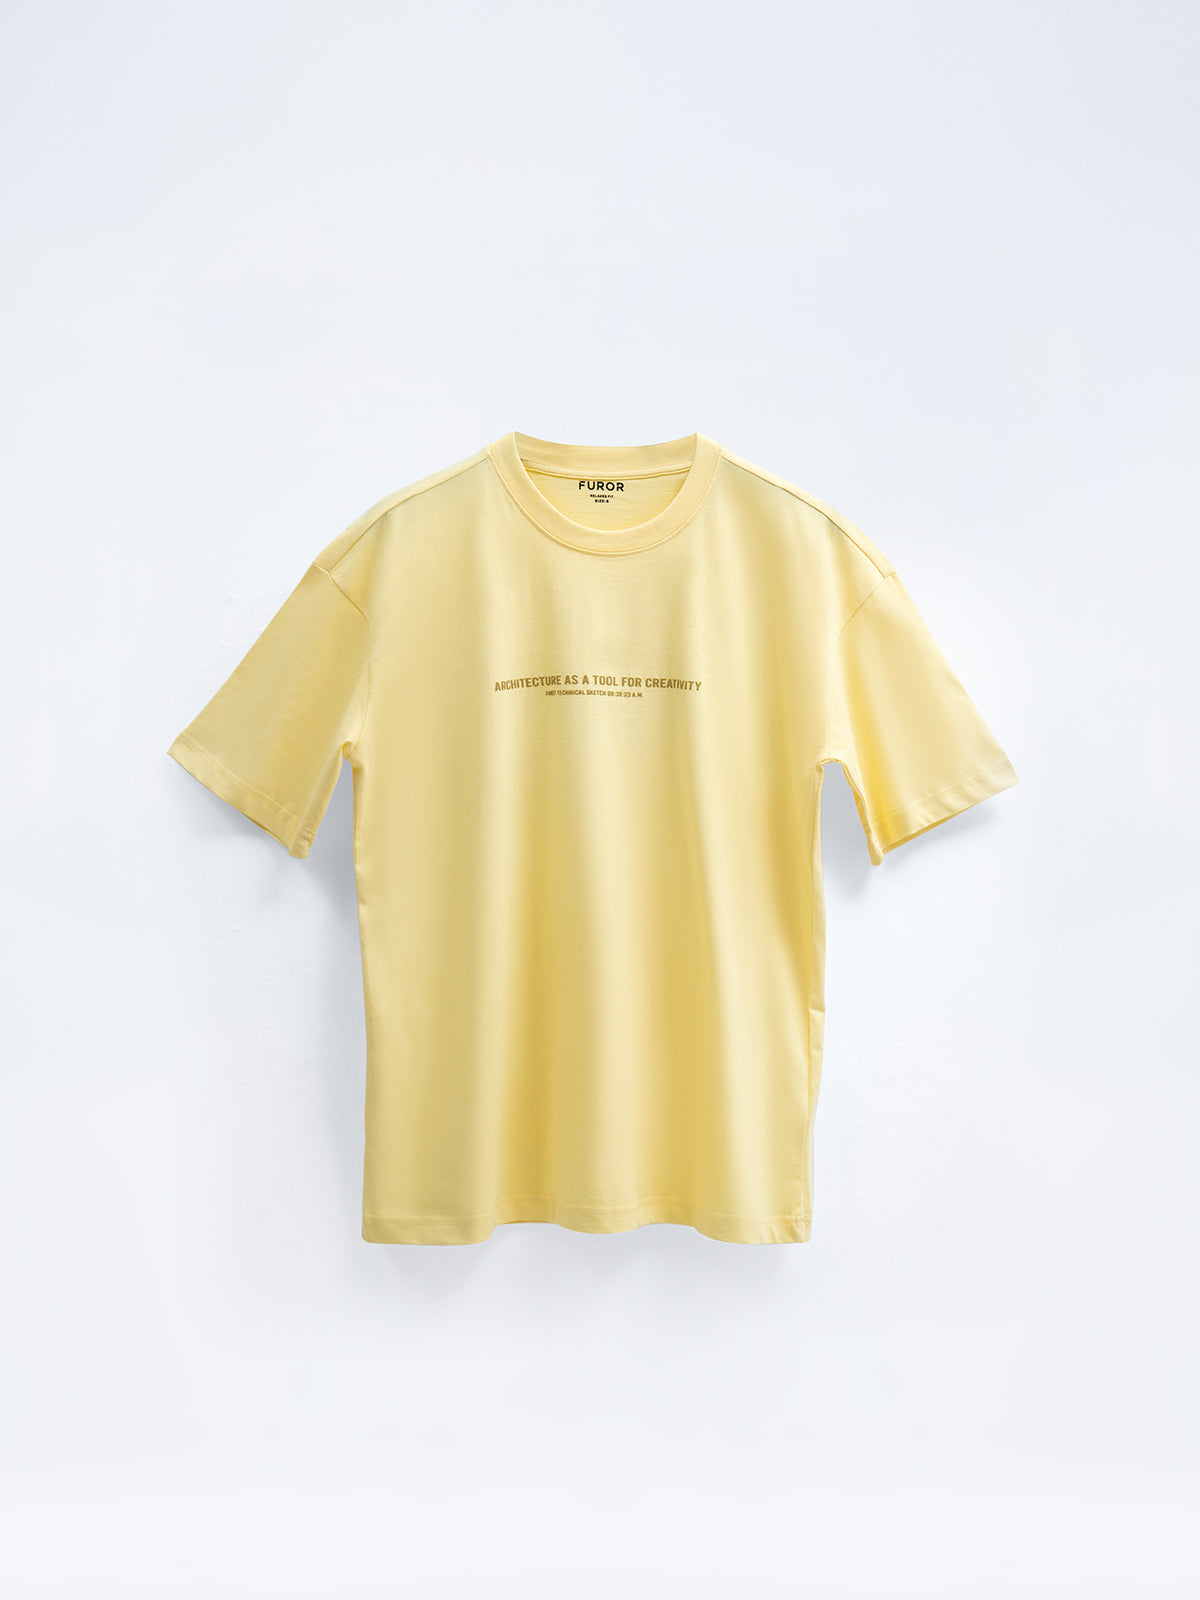 Relaxed Fit Graphic Tee - FMTGT24-040